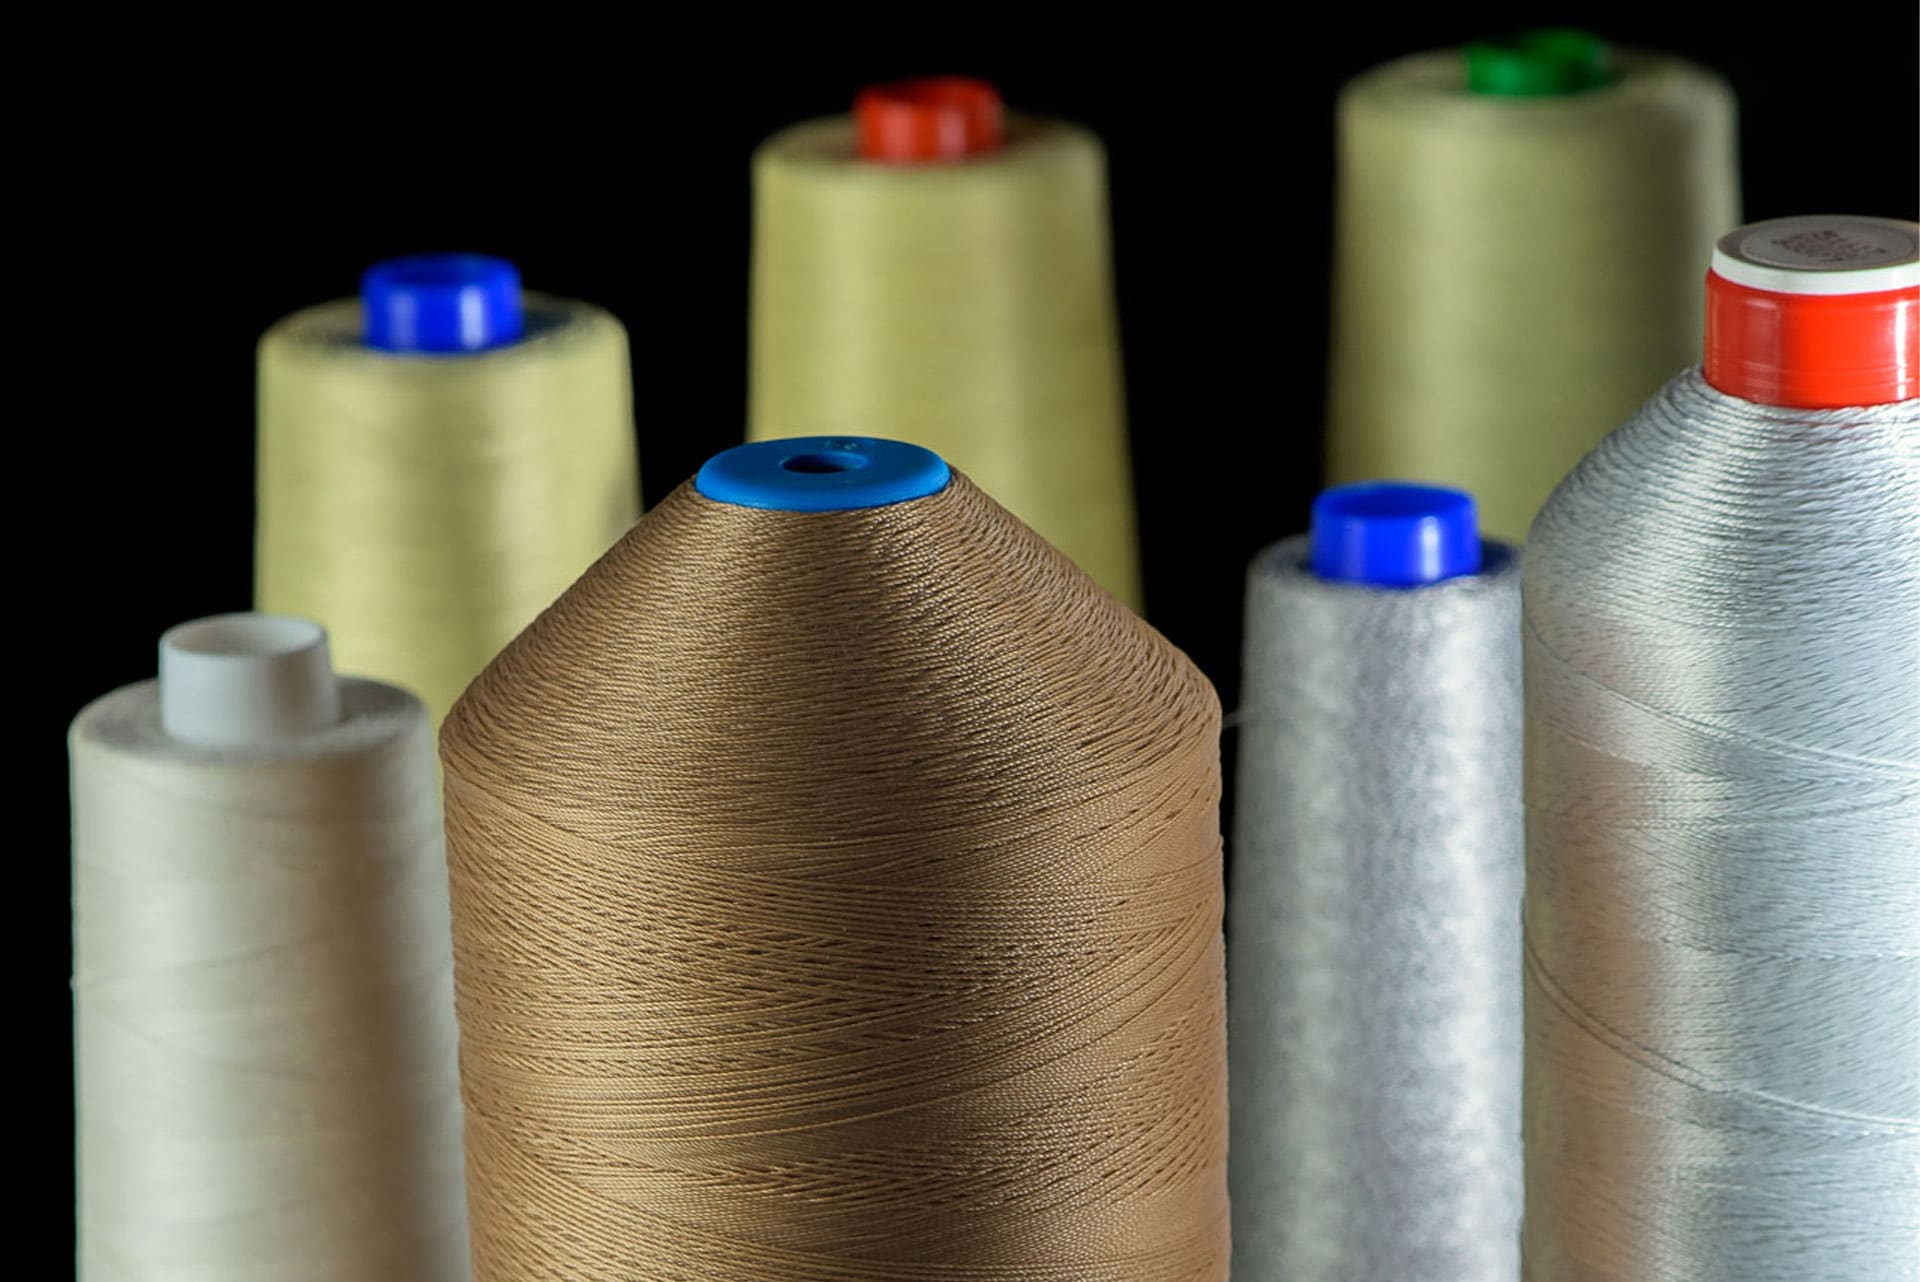 Our range of technical sewing threads and accessories